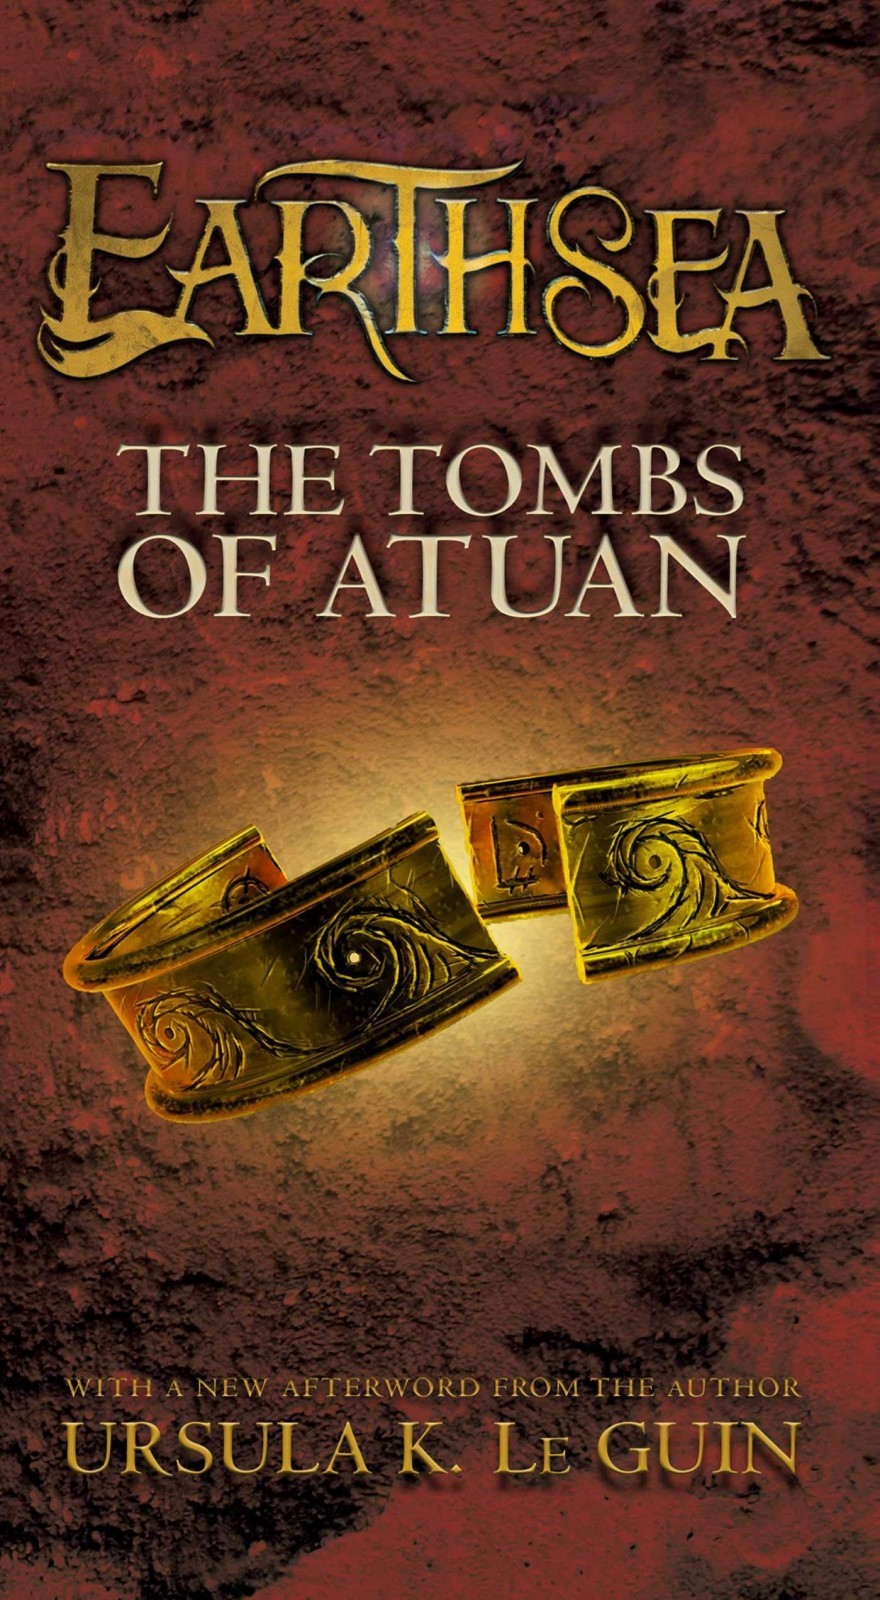 The Tombs of Atuan By Ursula K. Le Guin